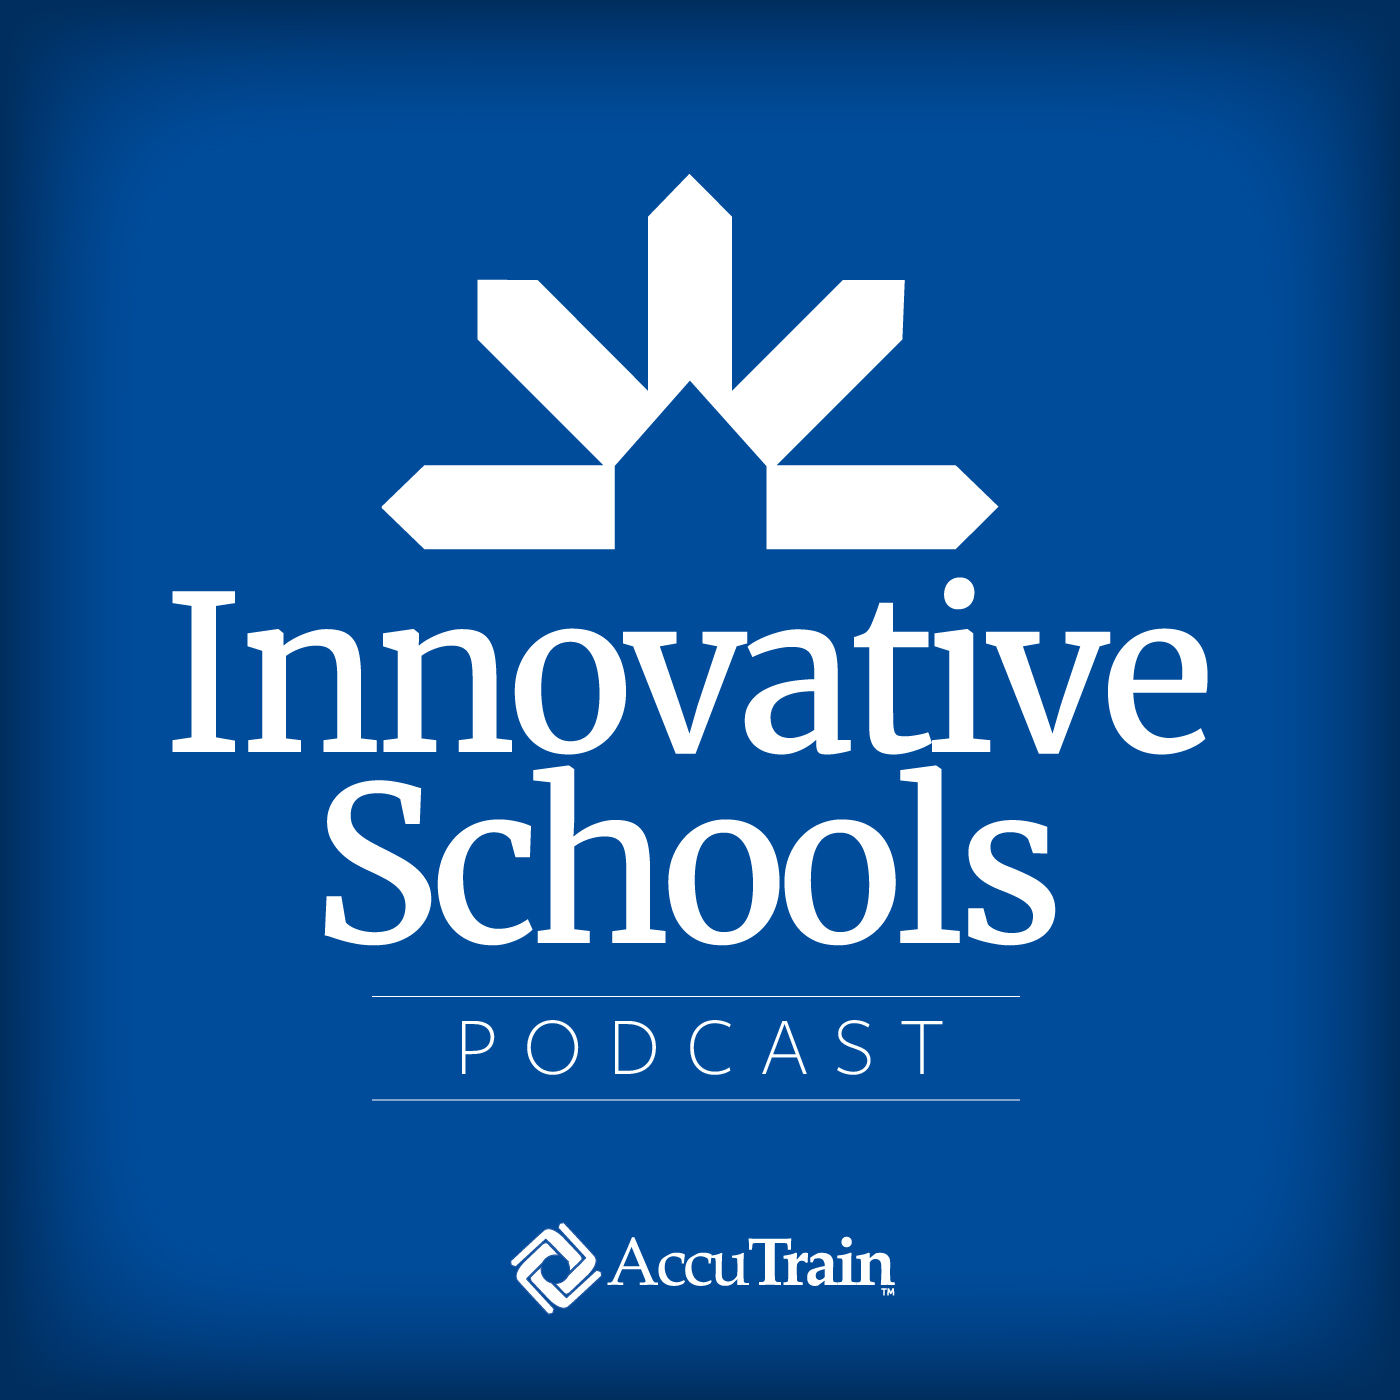 innovative schools podcast presented by accutrain